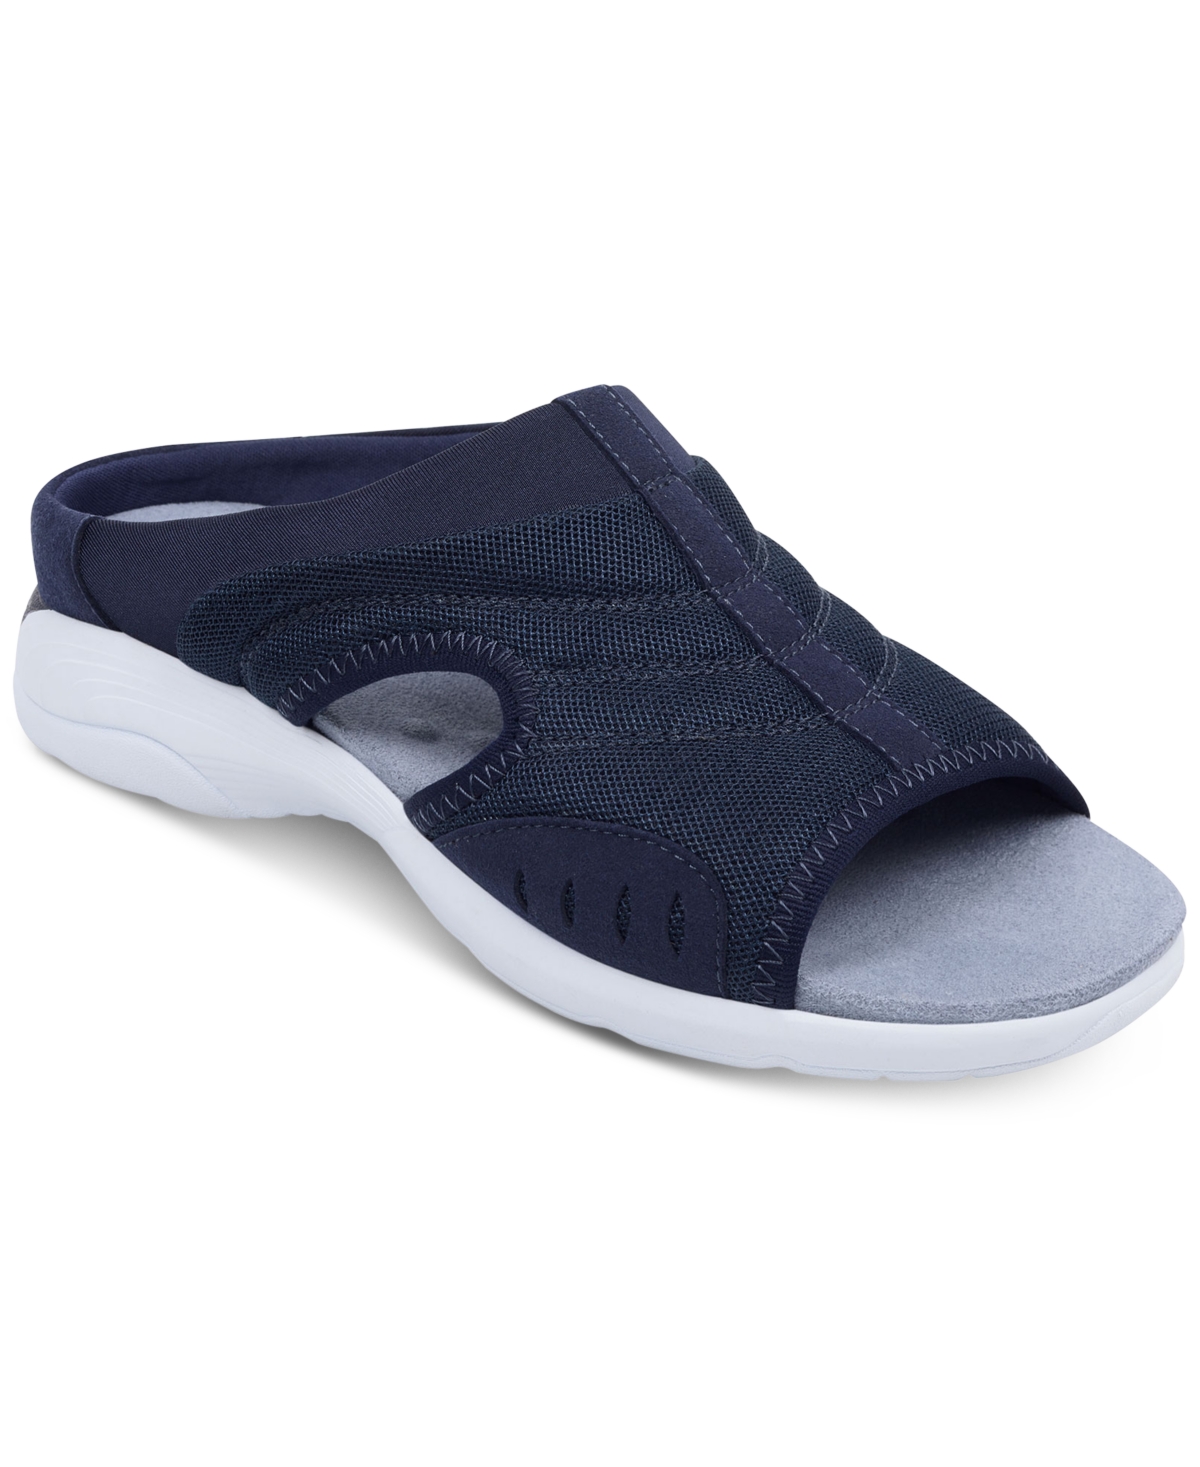 UPC 192733305498 product image for Easy Spirit Women's Traciee Square Toe Casual Flat Sandals Women's Shoes | upcitemdb.com